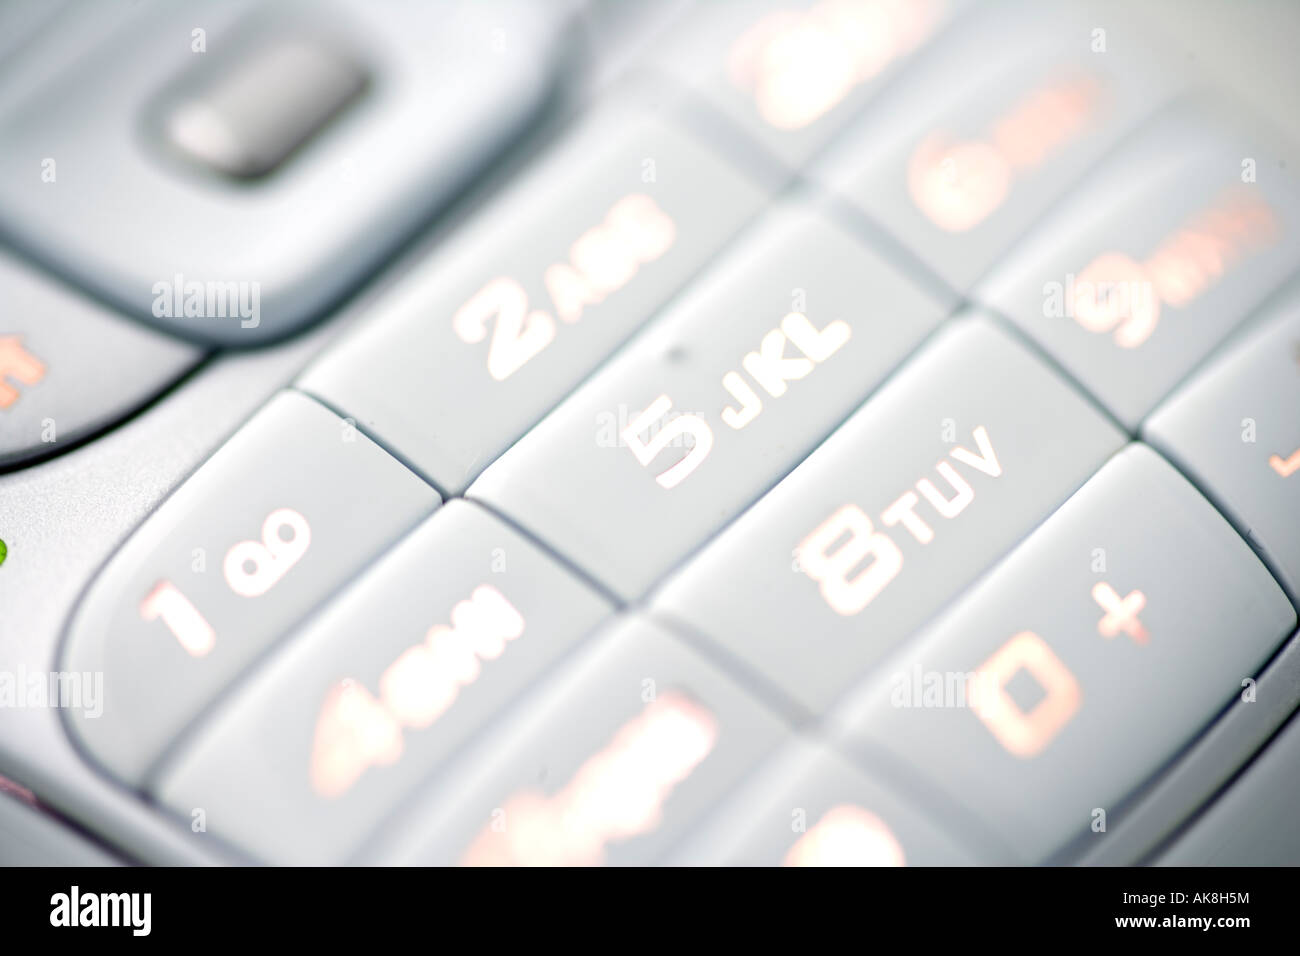 Close up photography of numbers and symbols on keys on the keypad of a white mobile phone Stock Photo